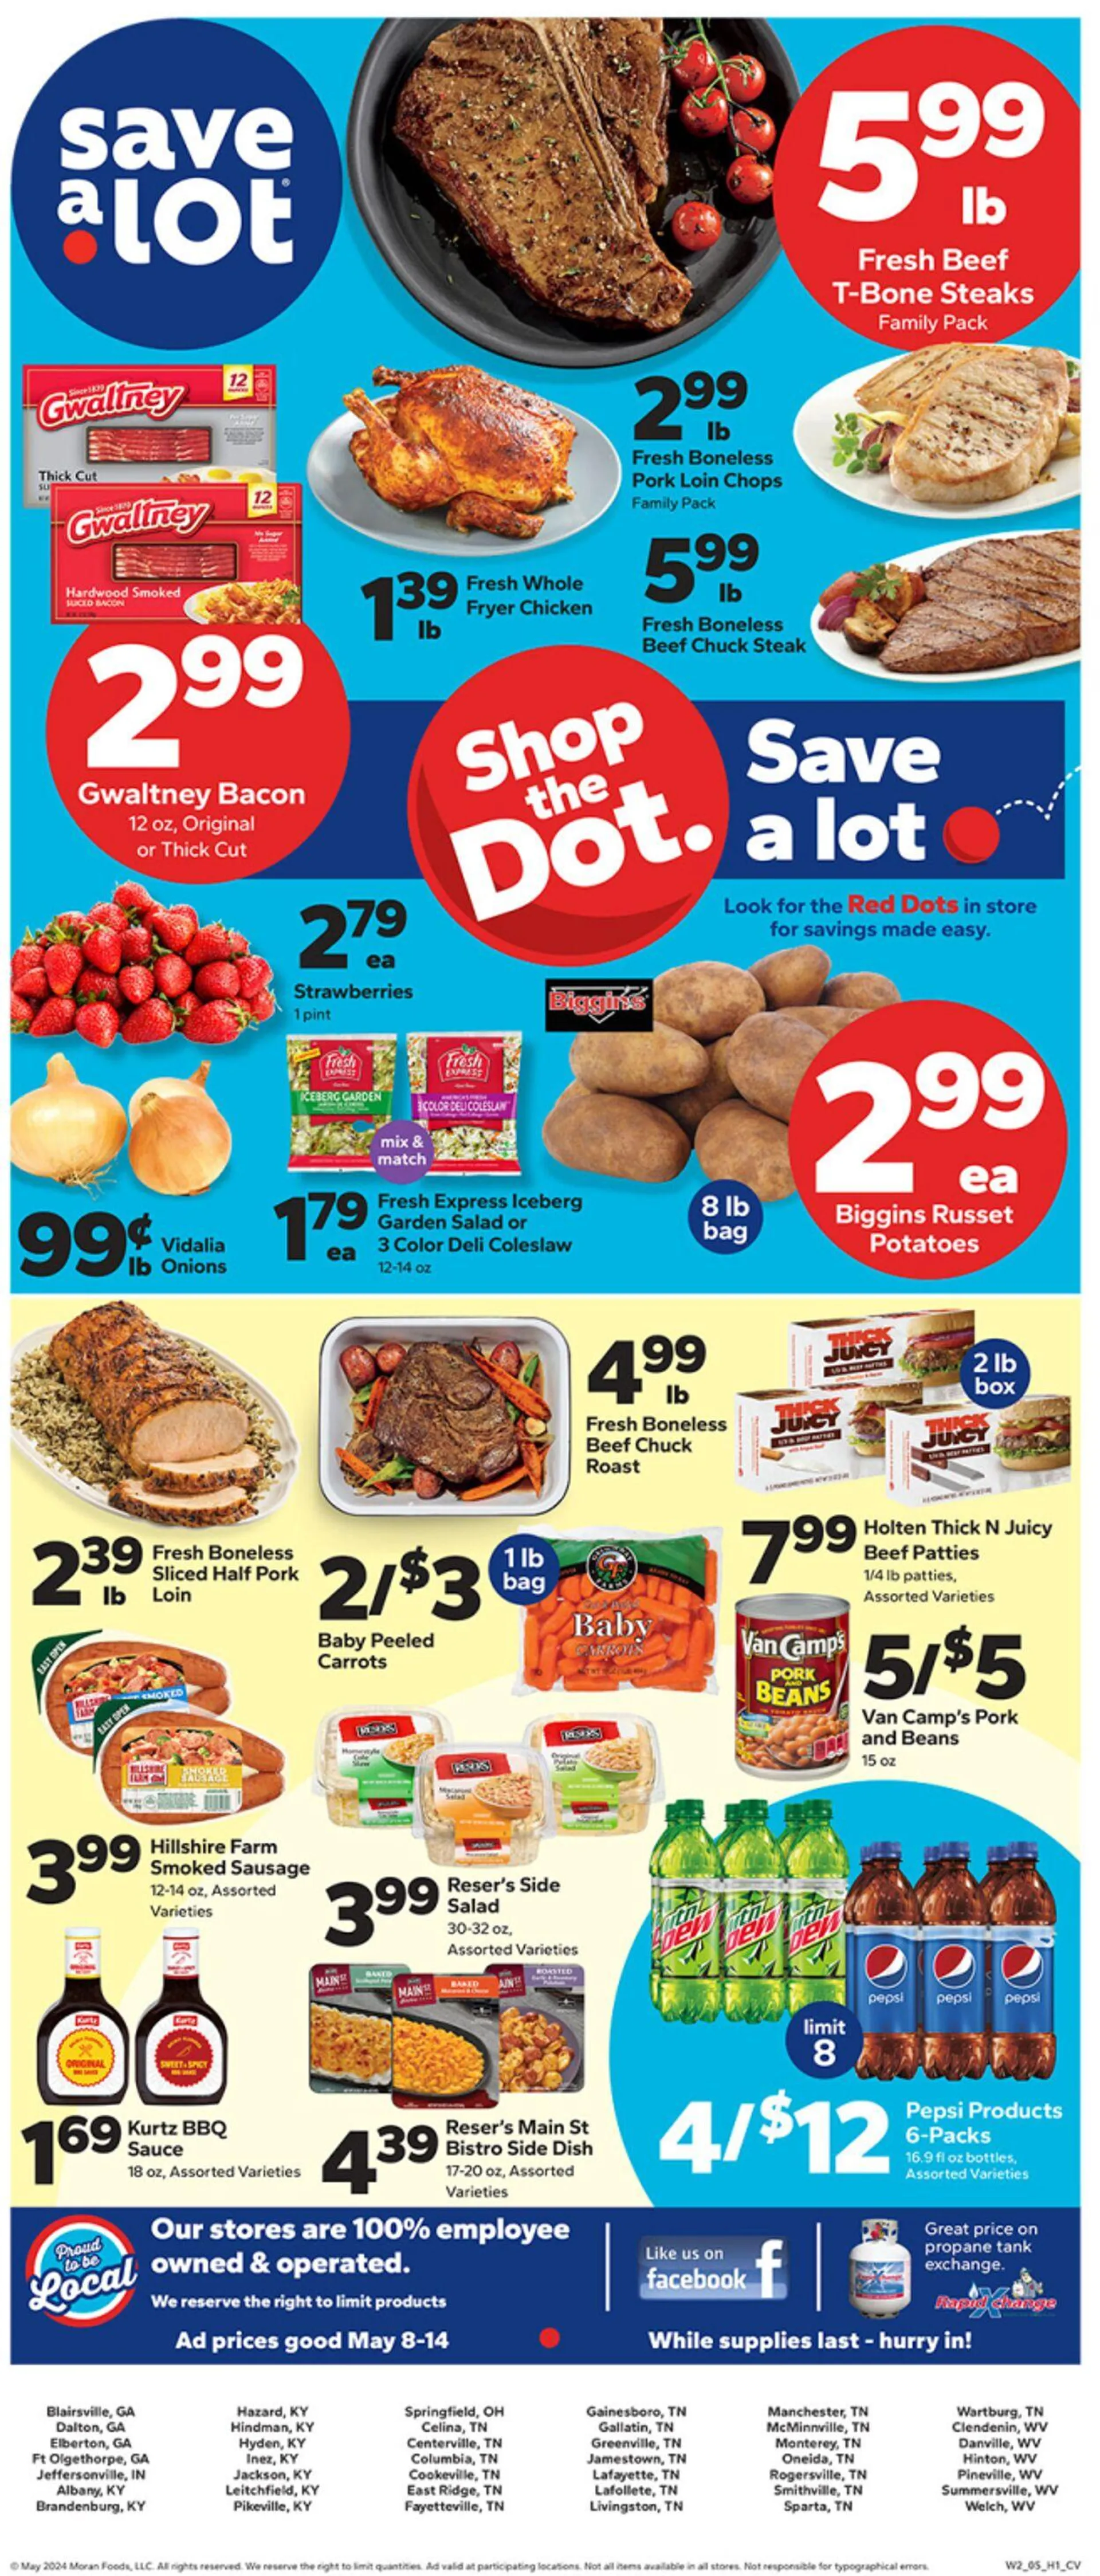 Save a Lot - Dalton Current weekly ad - 1